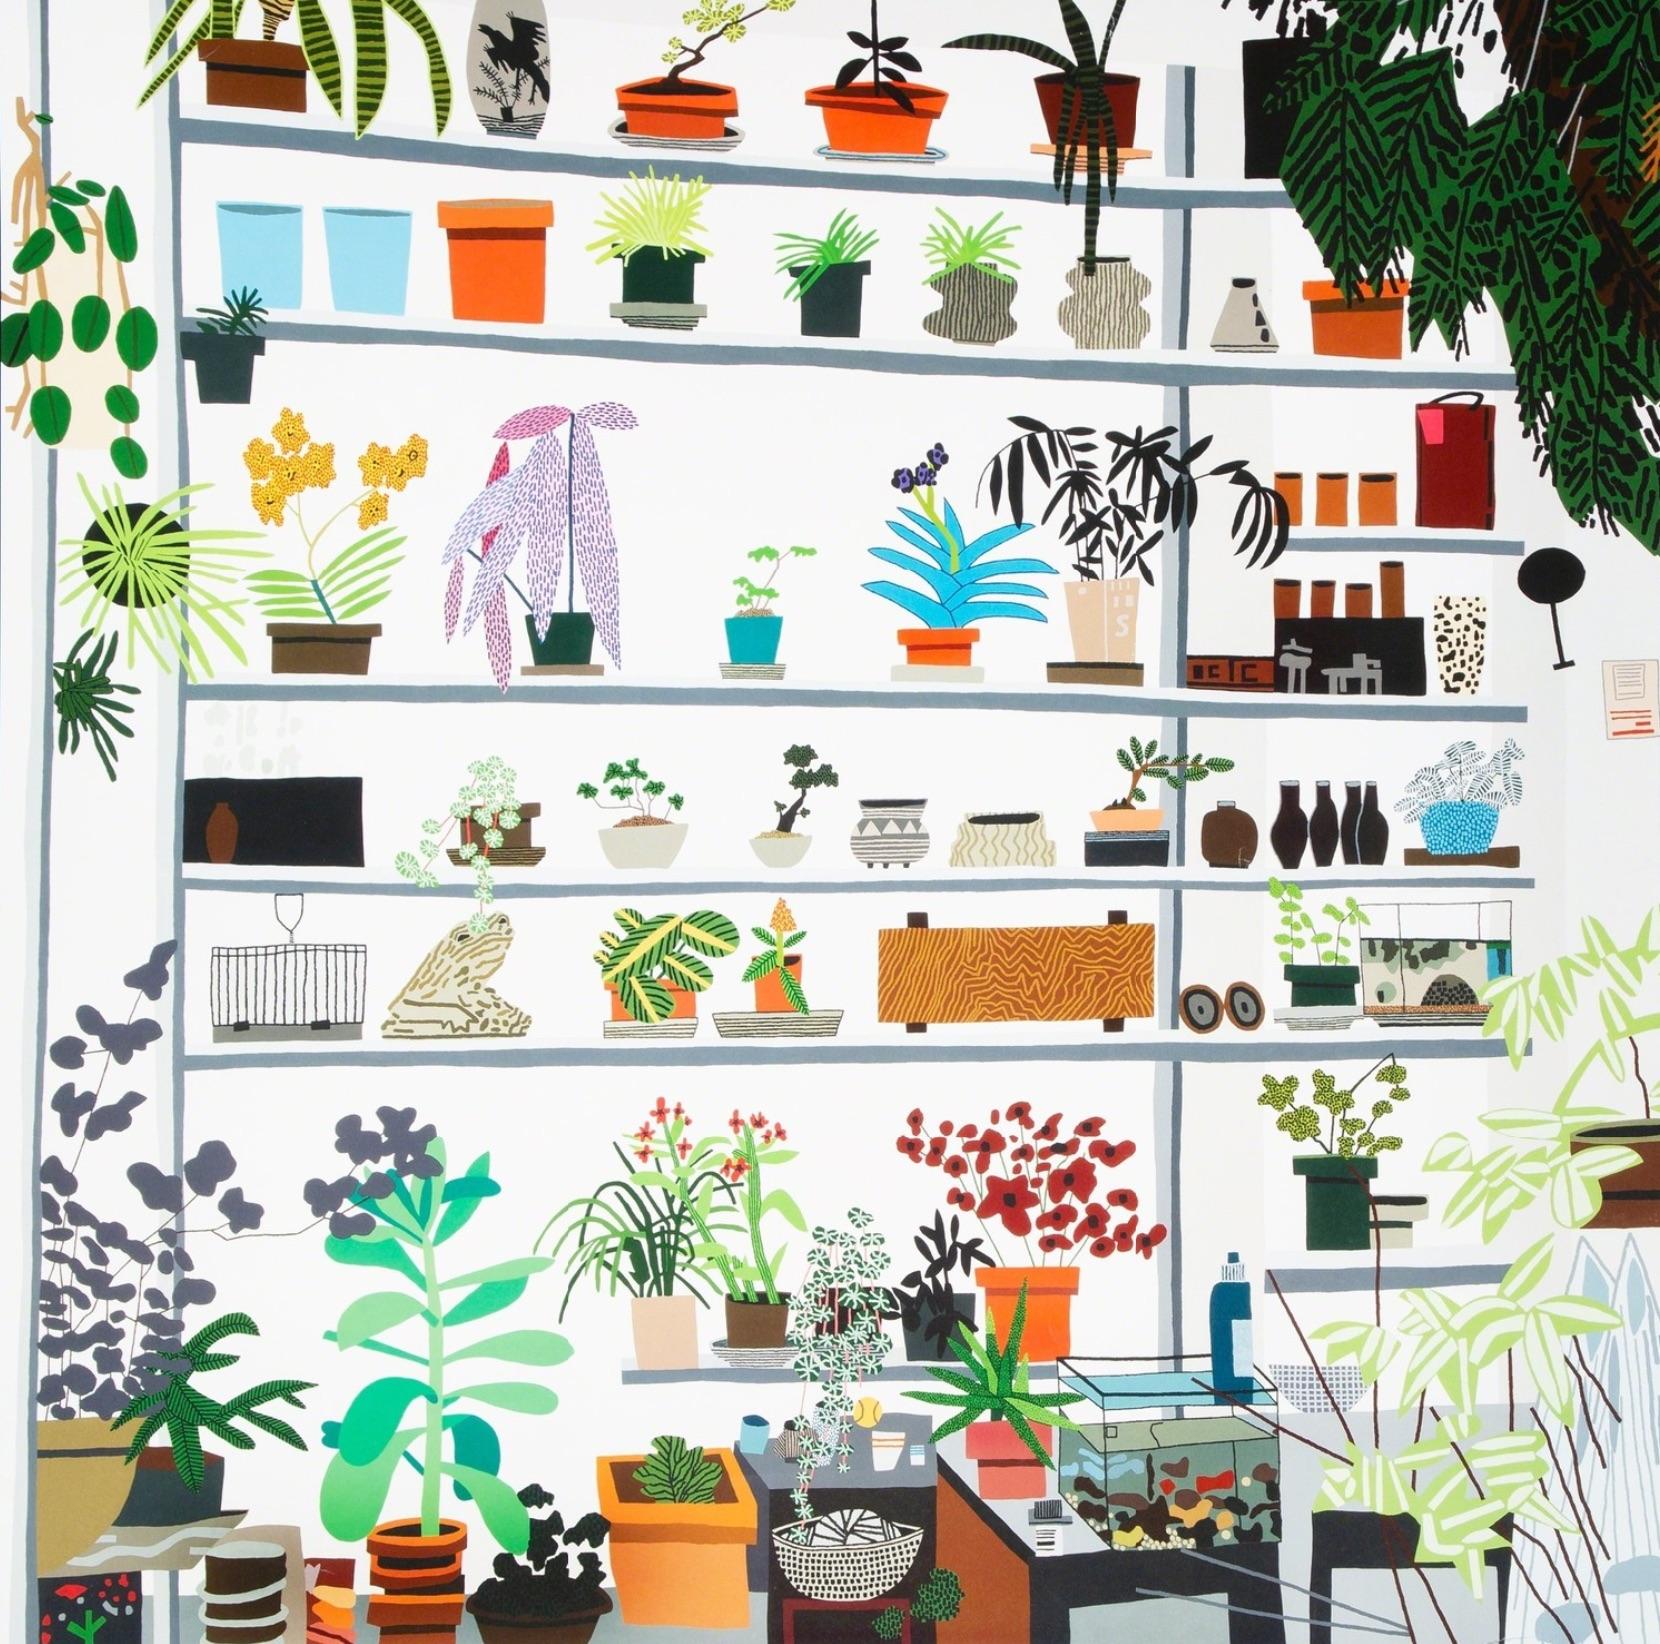 Jonas Wood
Large Shelf Still Life, 2017
Offset lithograph in colors on smooth wove paper
23 × 23 in  58.42 × 58.42 cm

Basketballs, ceramics, and lush plants fill Jonas Wood’s paintings, drawings, and prints, which mostly comprise intricate still